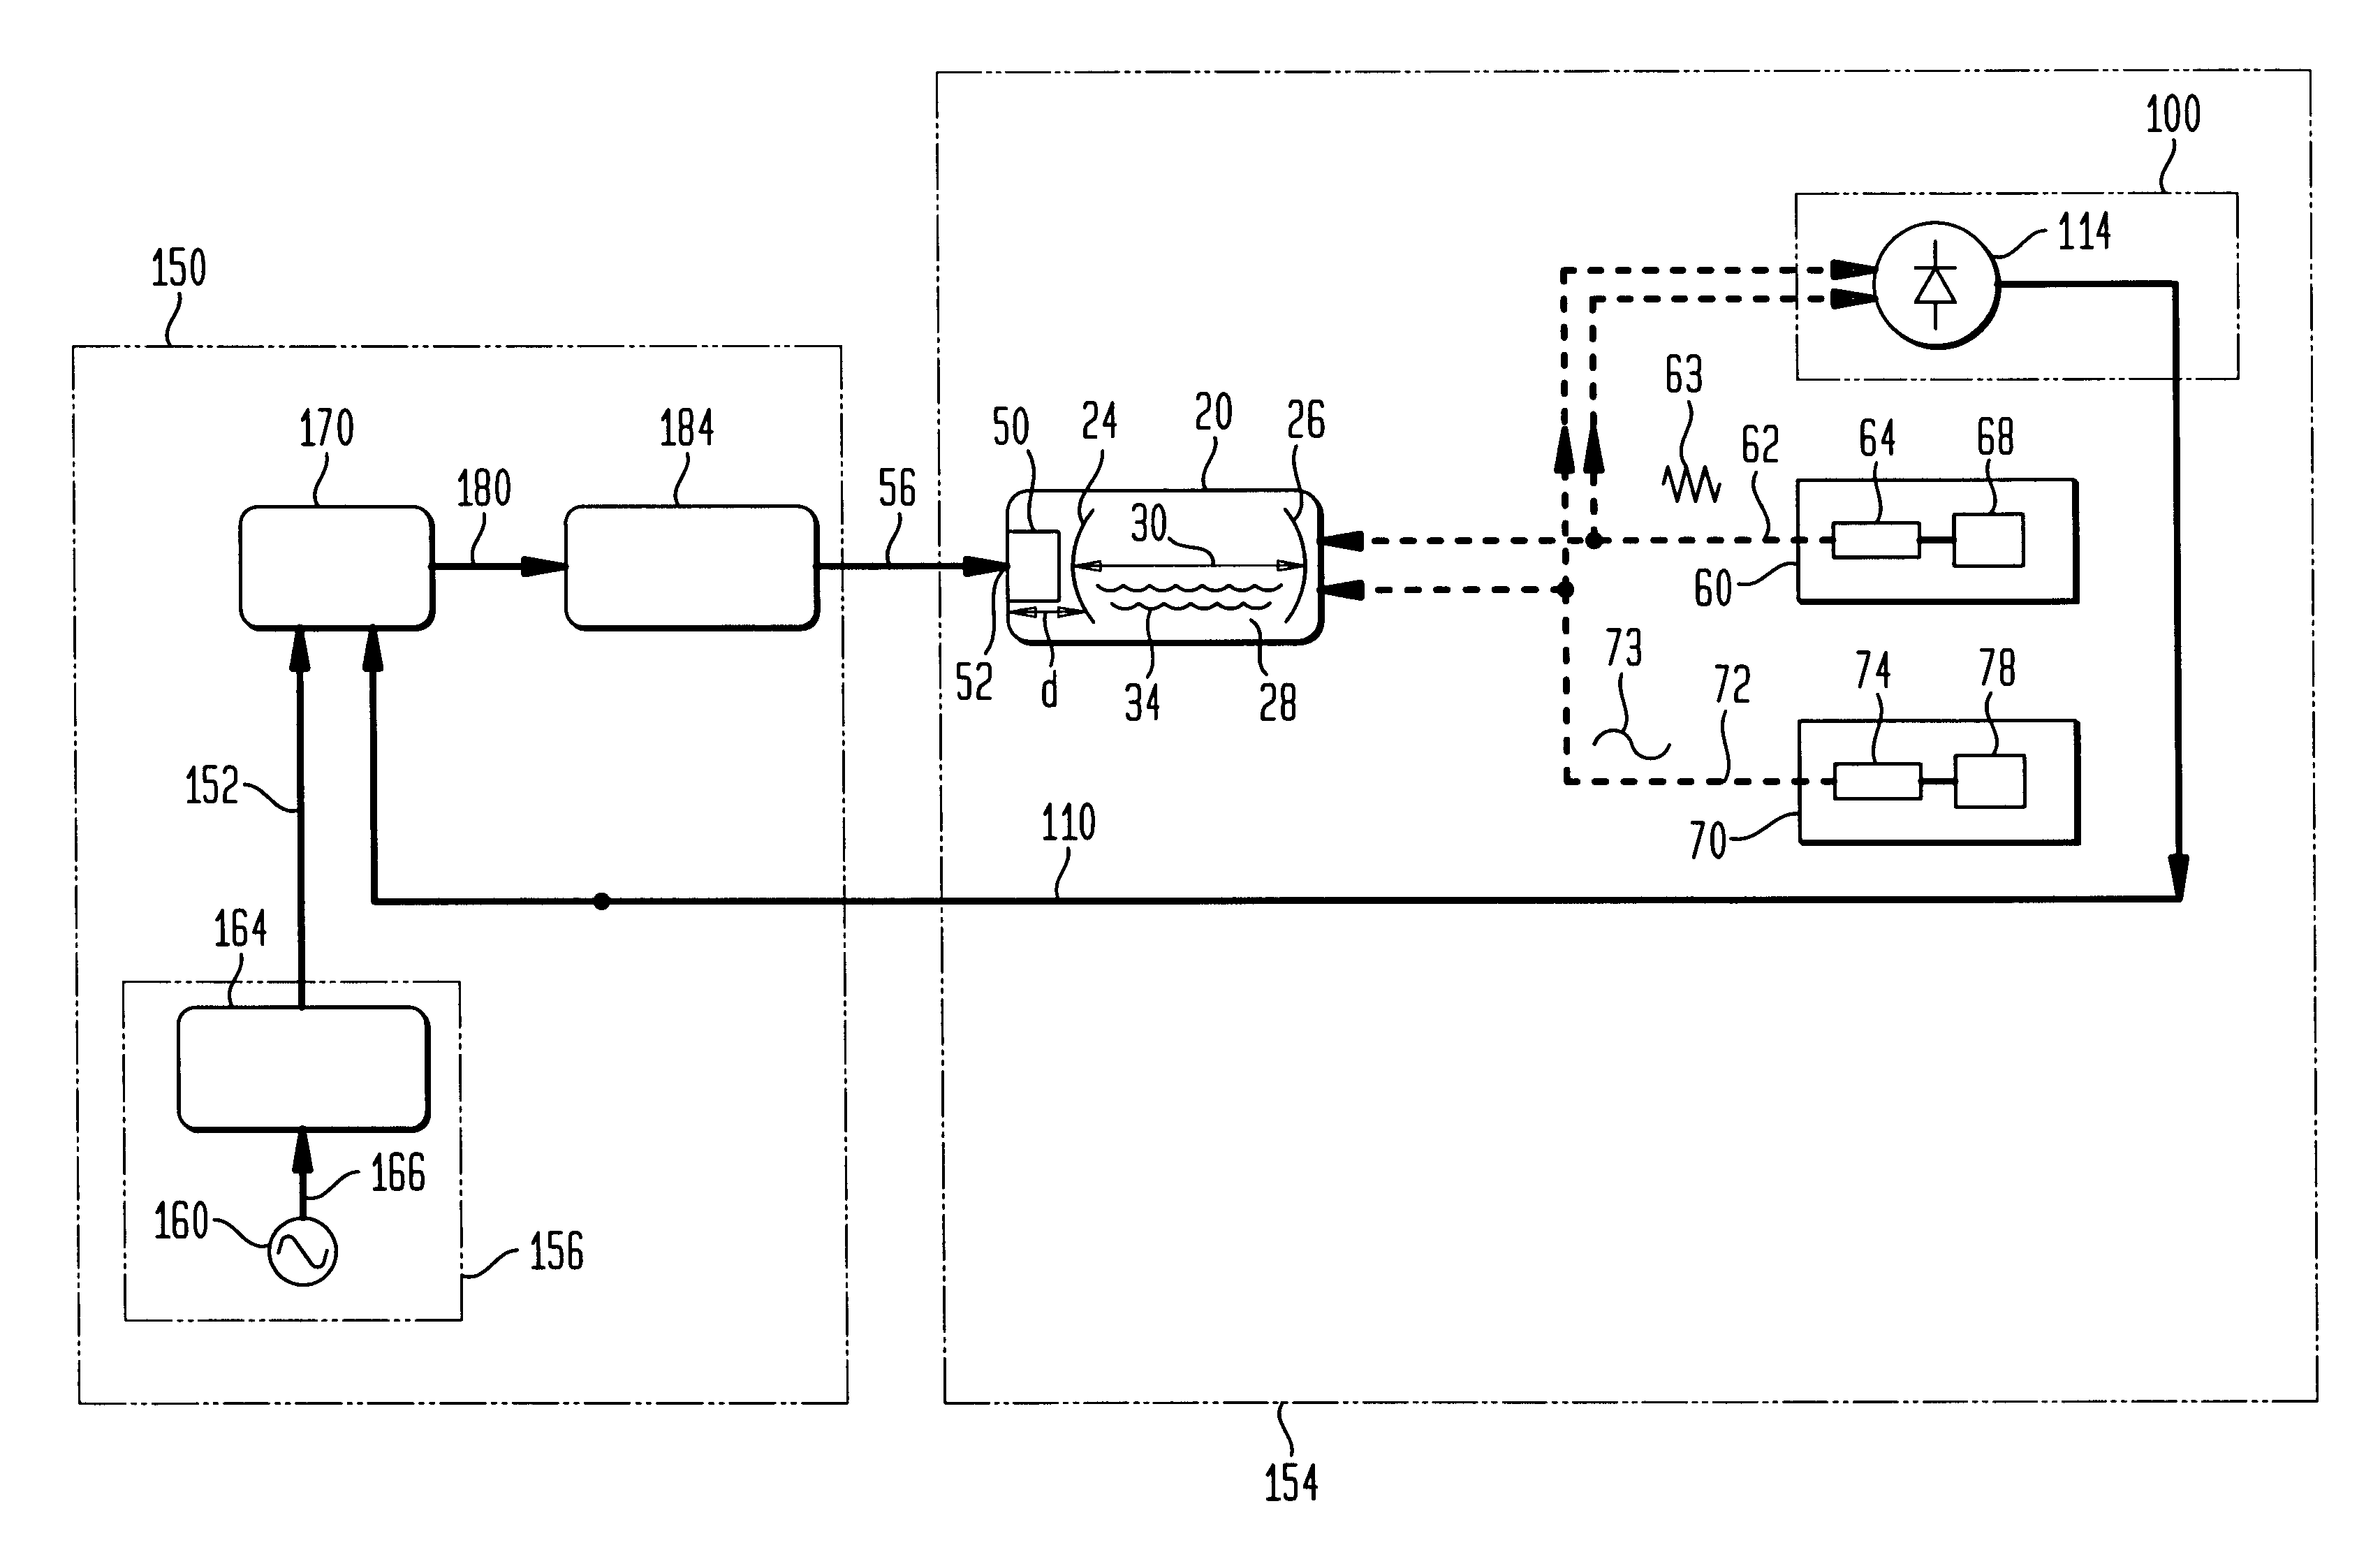 Apparatus and method for laser frequency control